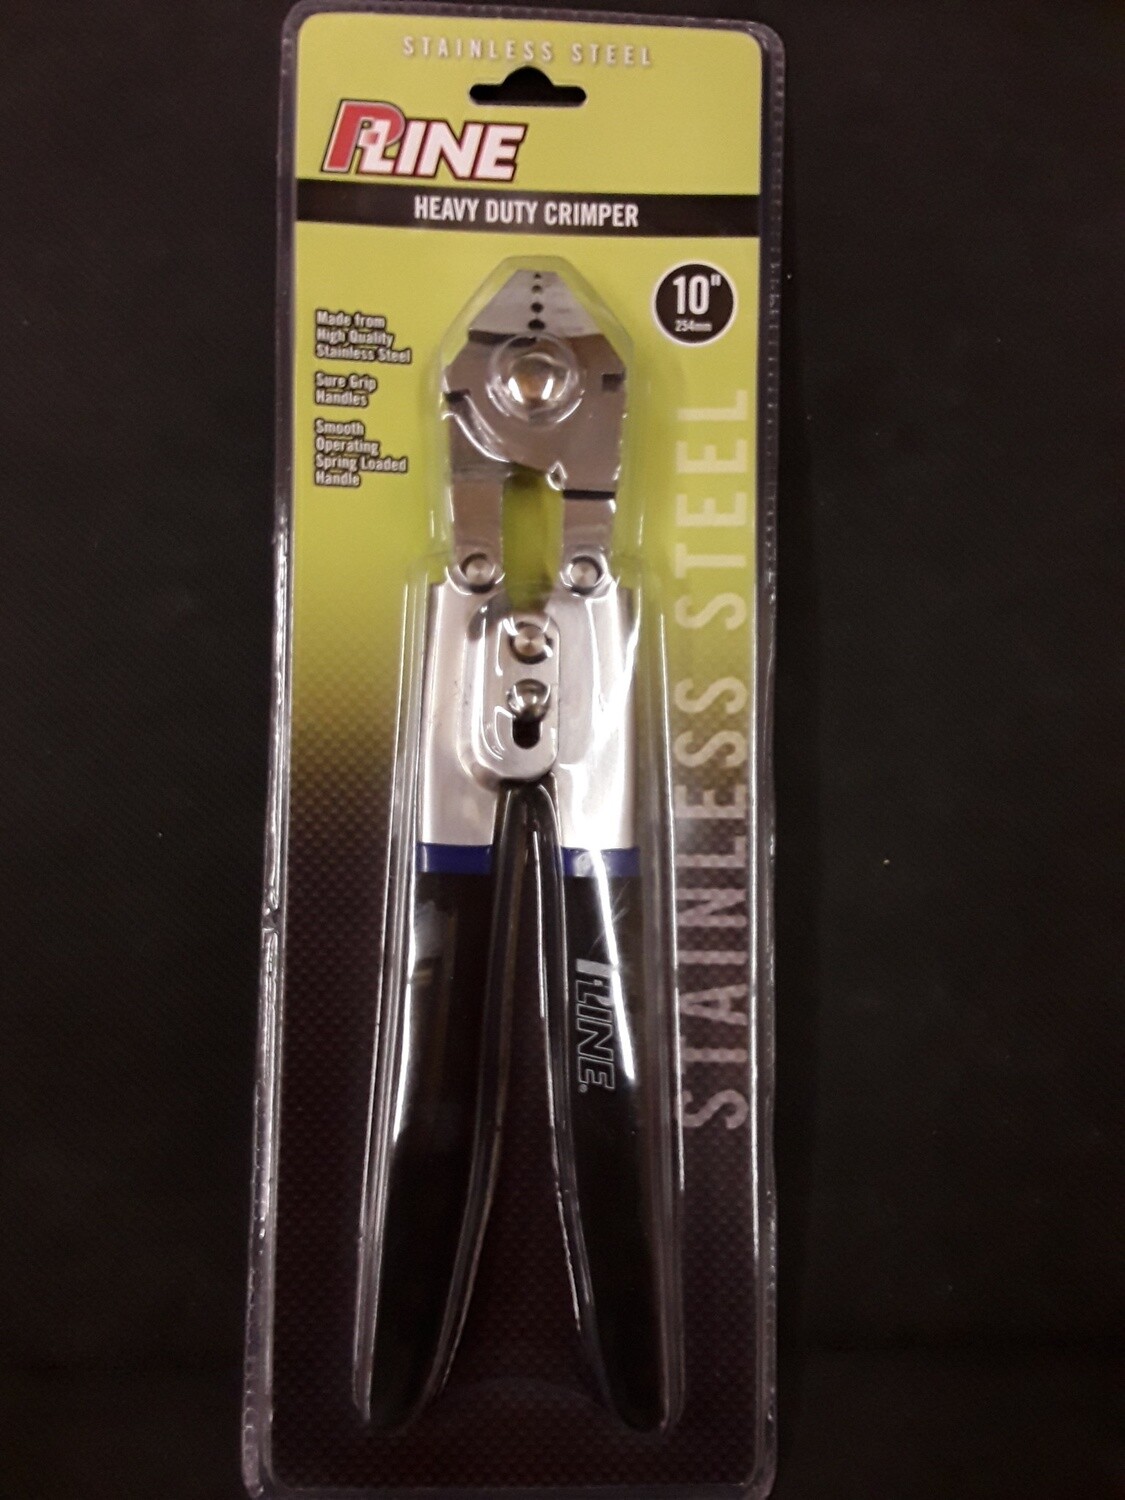 P-Line  HEAVY DUTY HAND CRIMPER 10" STAINLESS STEEL